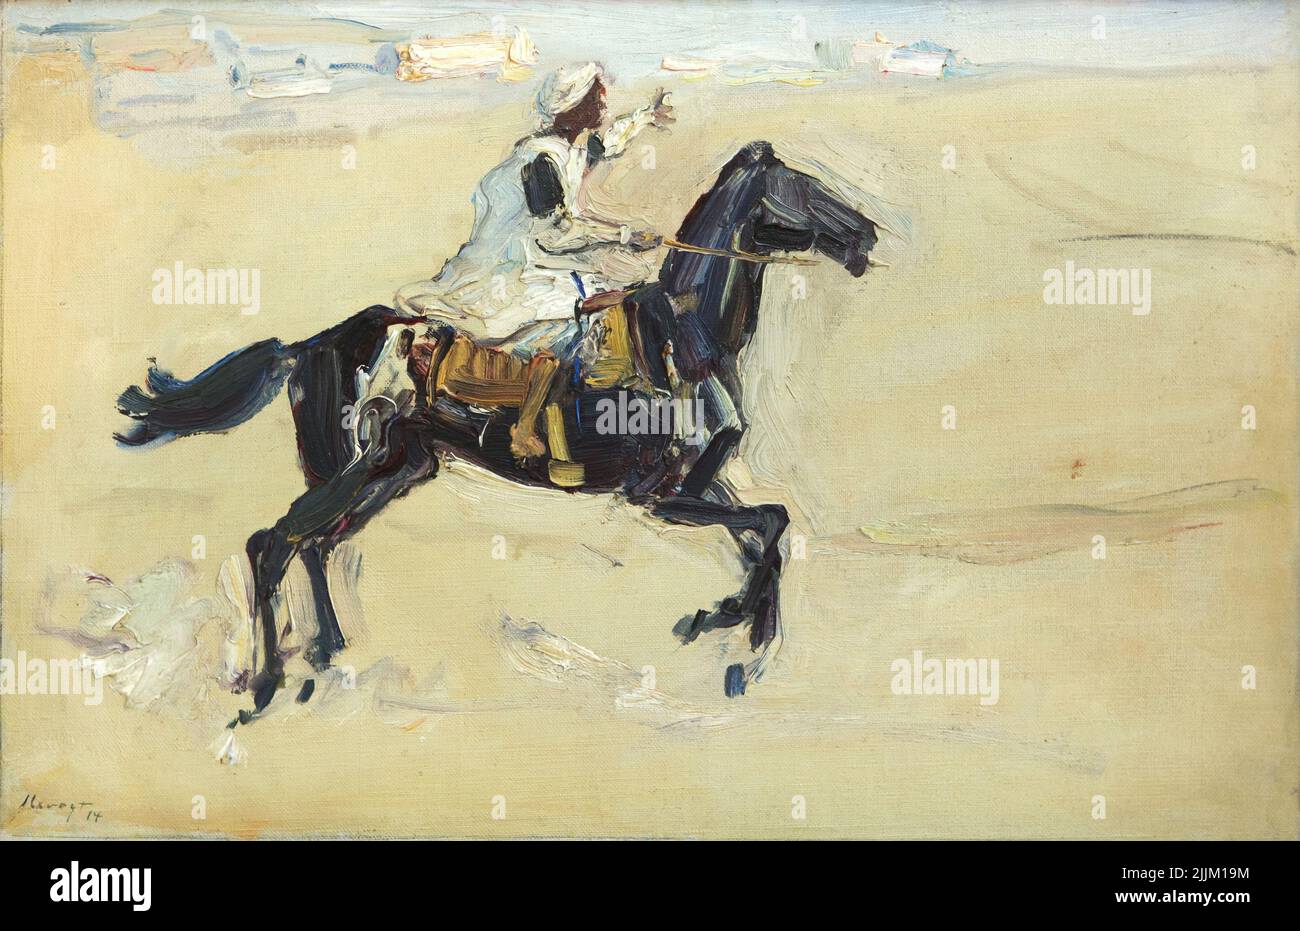 Painting 'Arab on Horseback' from the series 'Paintings of the Voyage to Egypt' by German Impressionist painter Max Slevogt (1914) on display in the Gаlеriе Nеuе Mеistеr (Nеw Маstеrs Gаllеry) in the Аlbеrtinum in Drеsdеn, Gеrmаny. Stock Photo